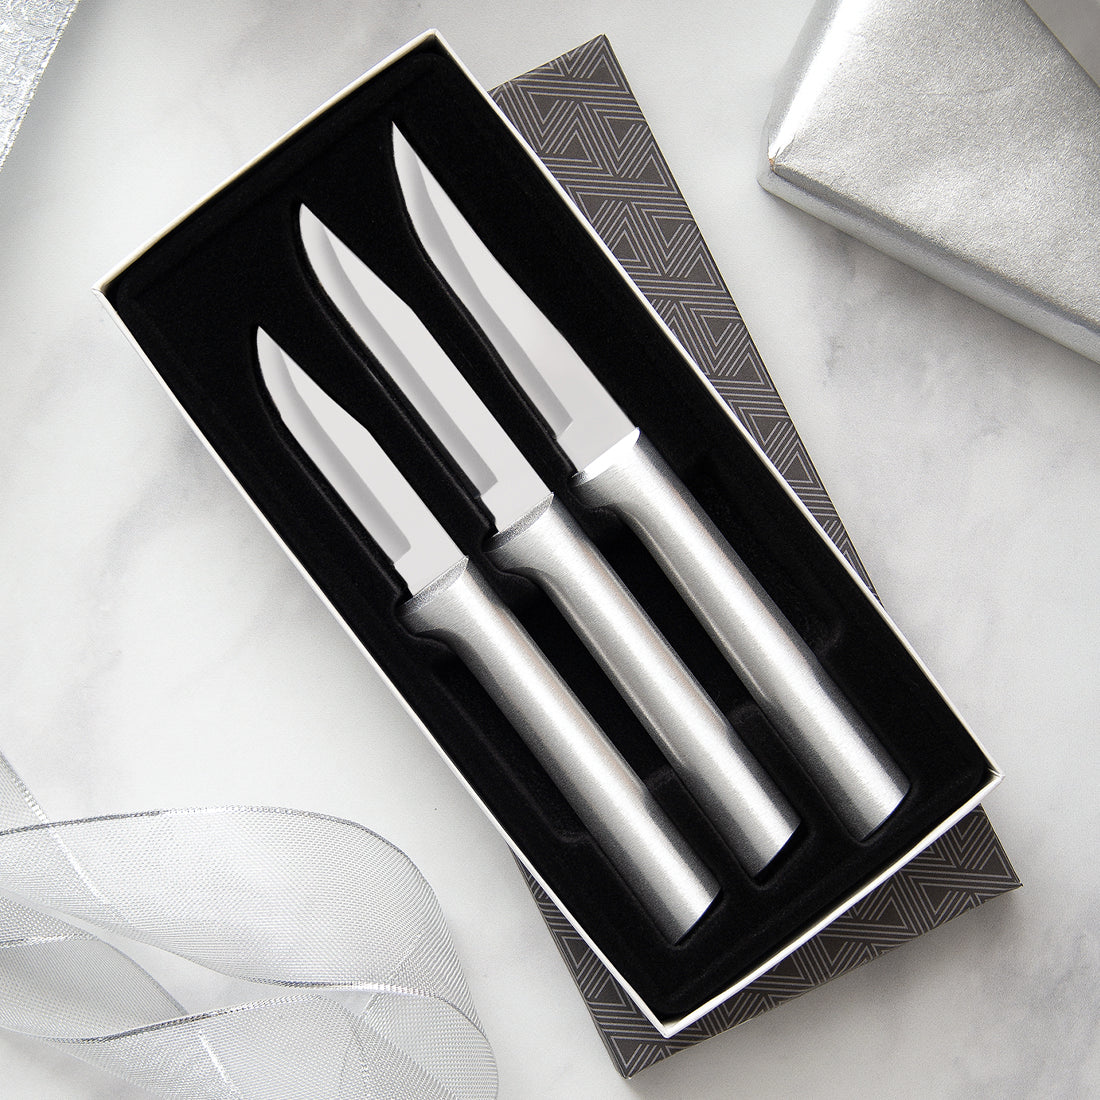 Cutlery Gift Sets